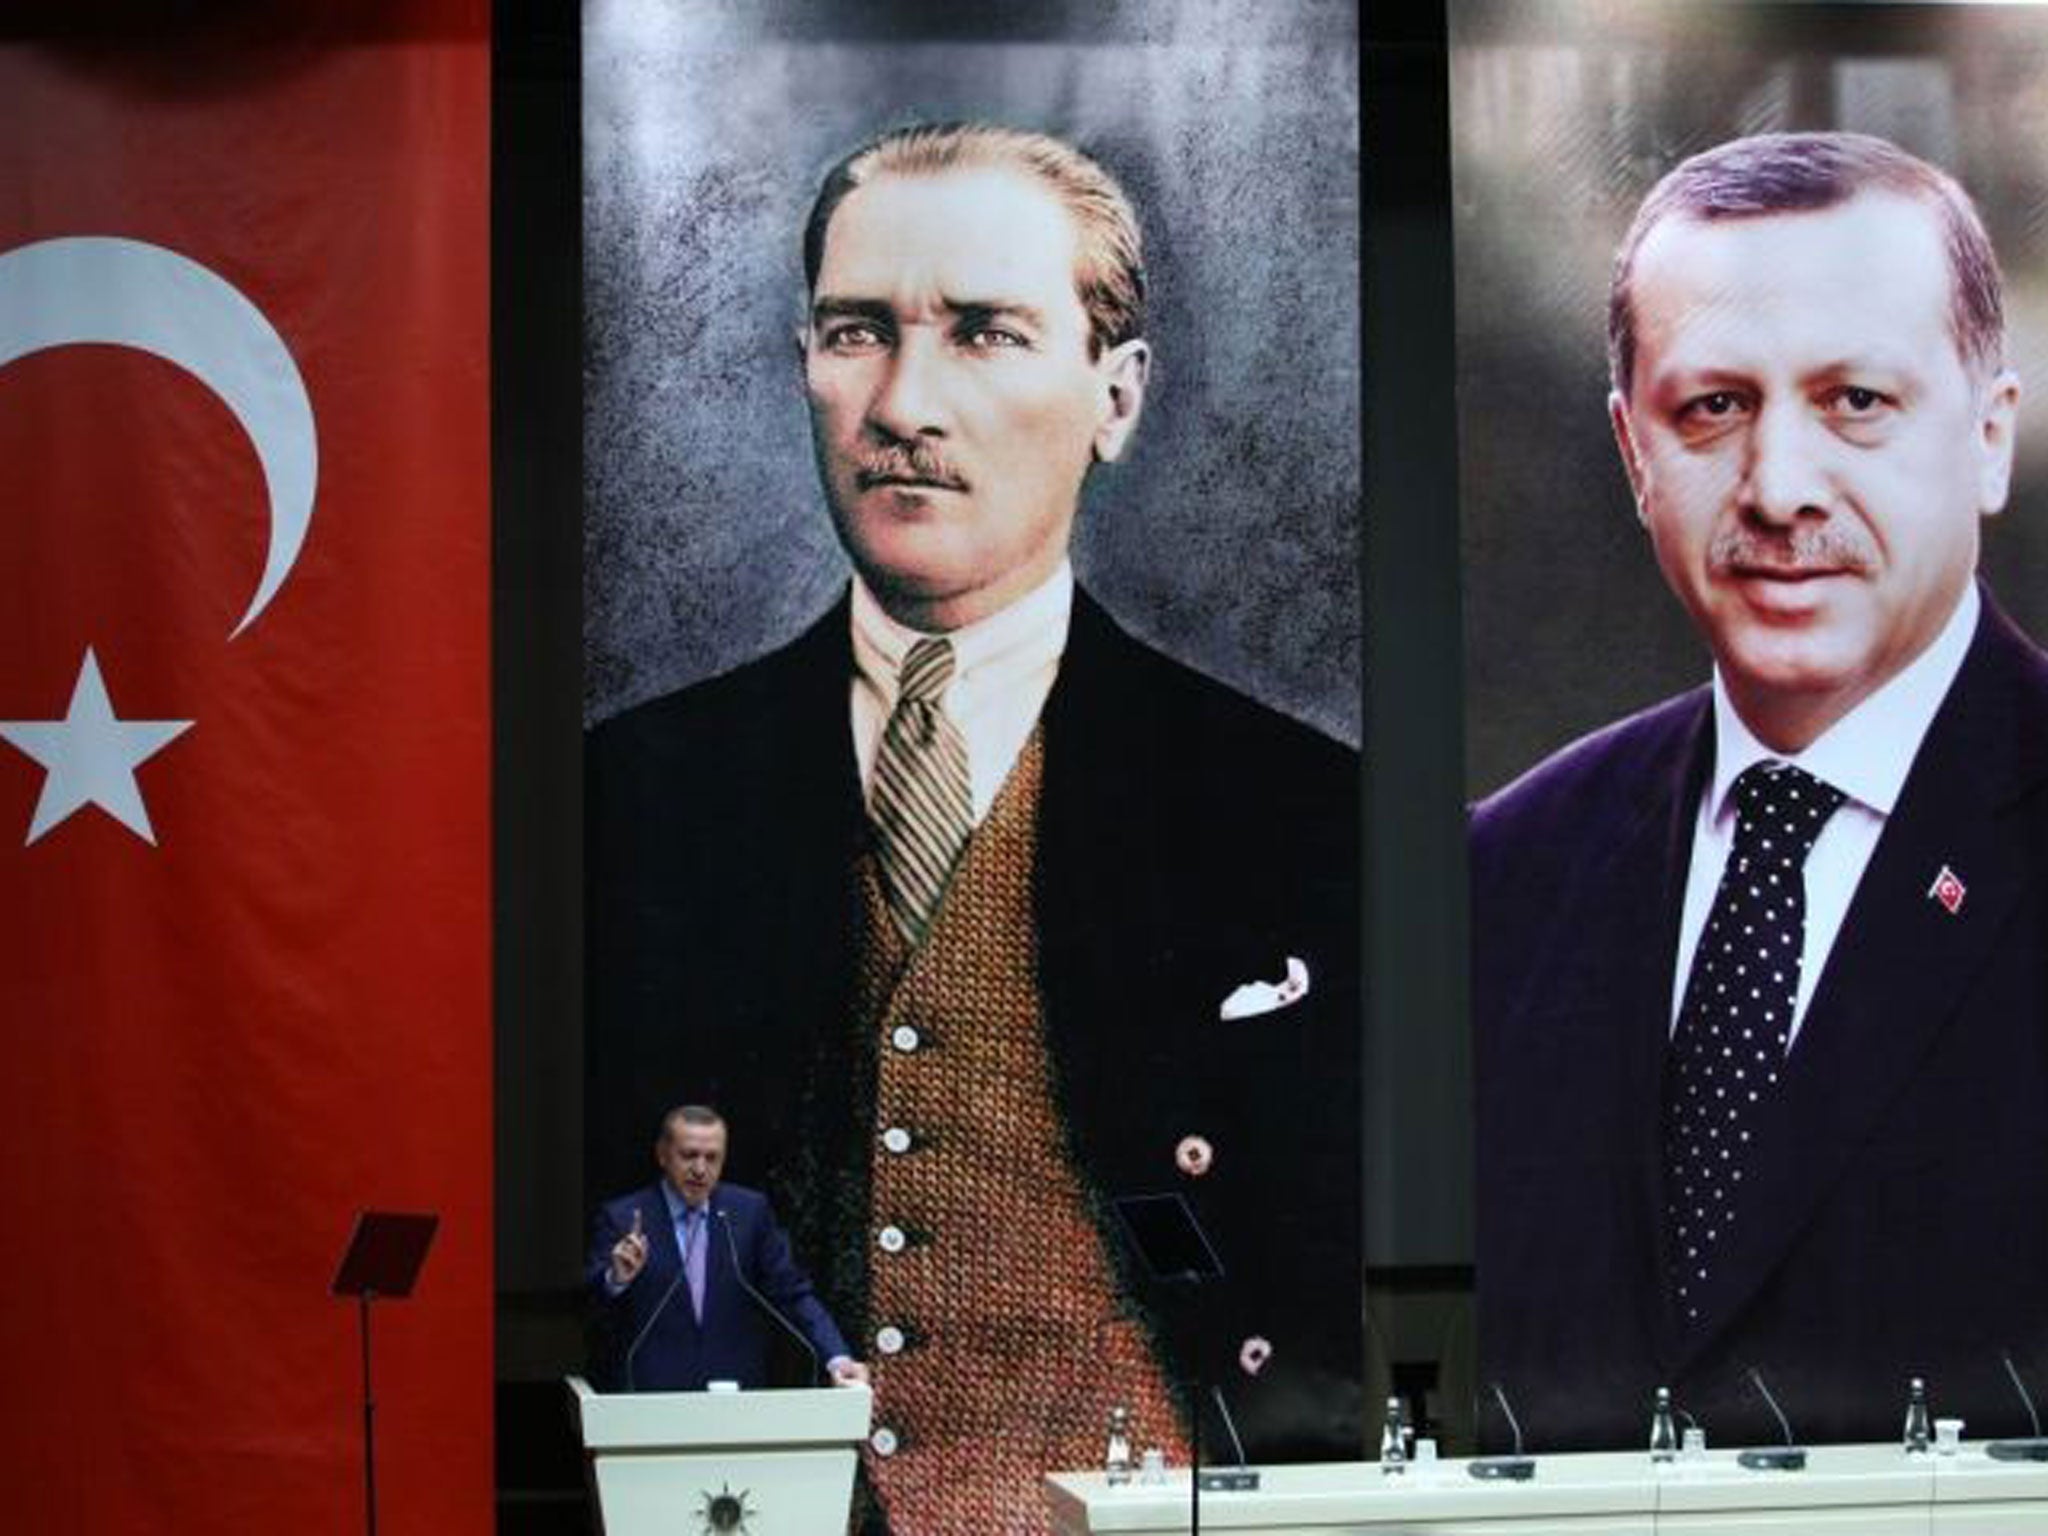 Past glory: Erdogan speaks, backed by portraits of himself and Ataturk, earlier this month